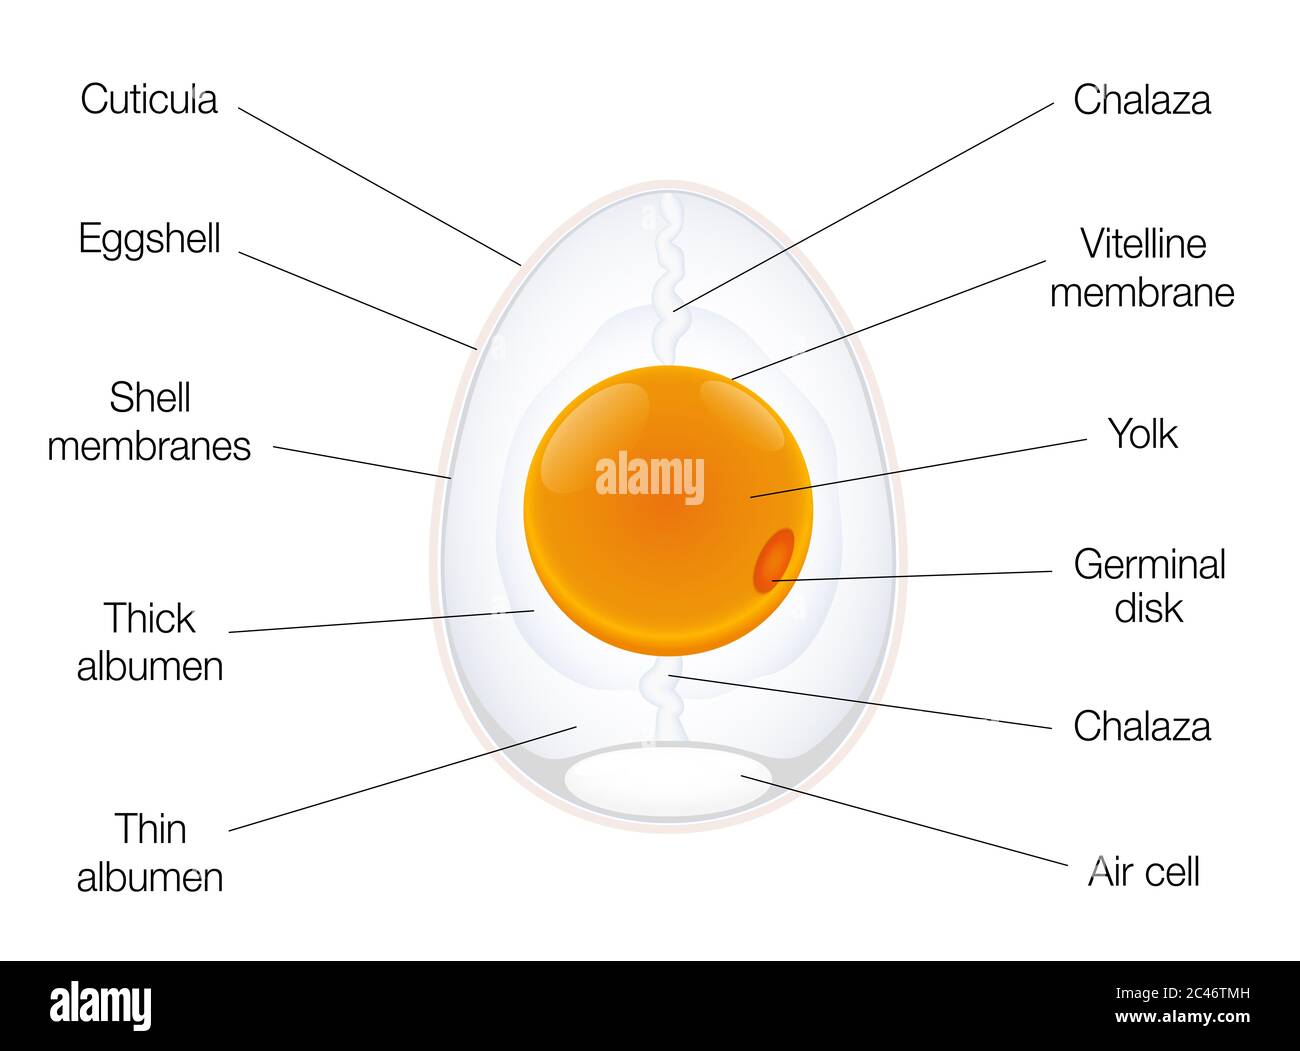 Anatomy of a birds egg. Labeled egg structure chart with names of the components - illustration on white background. Stock Photo